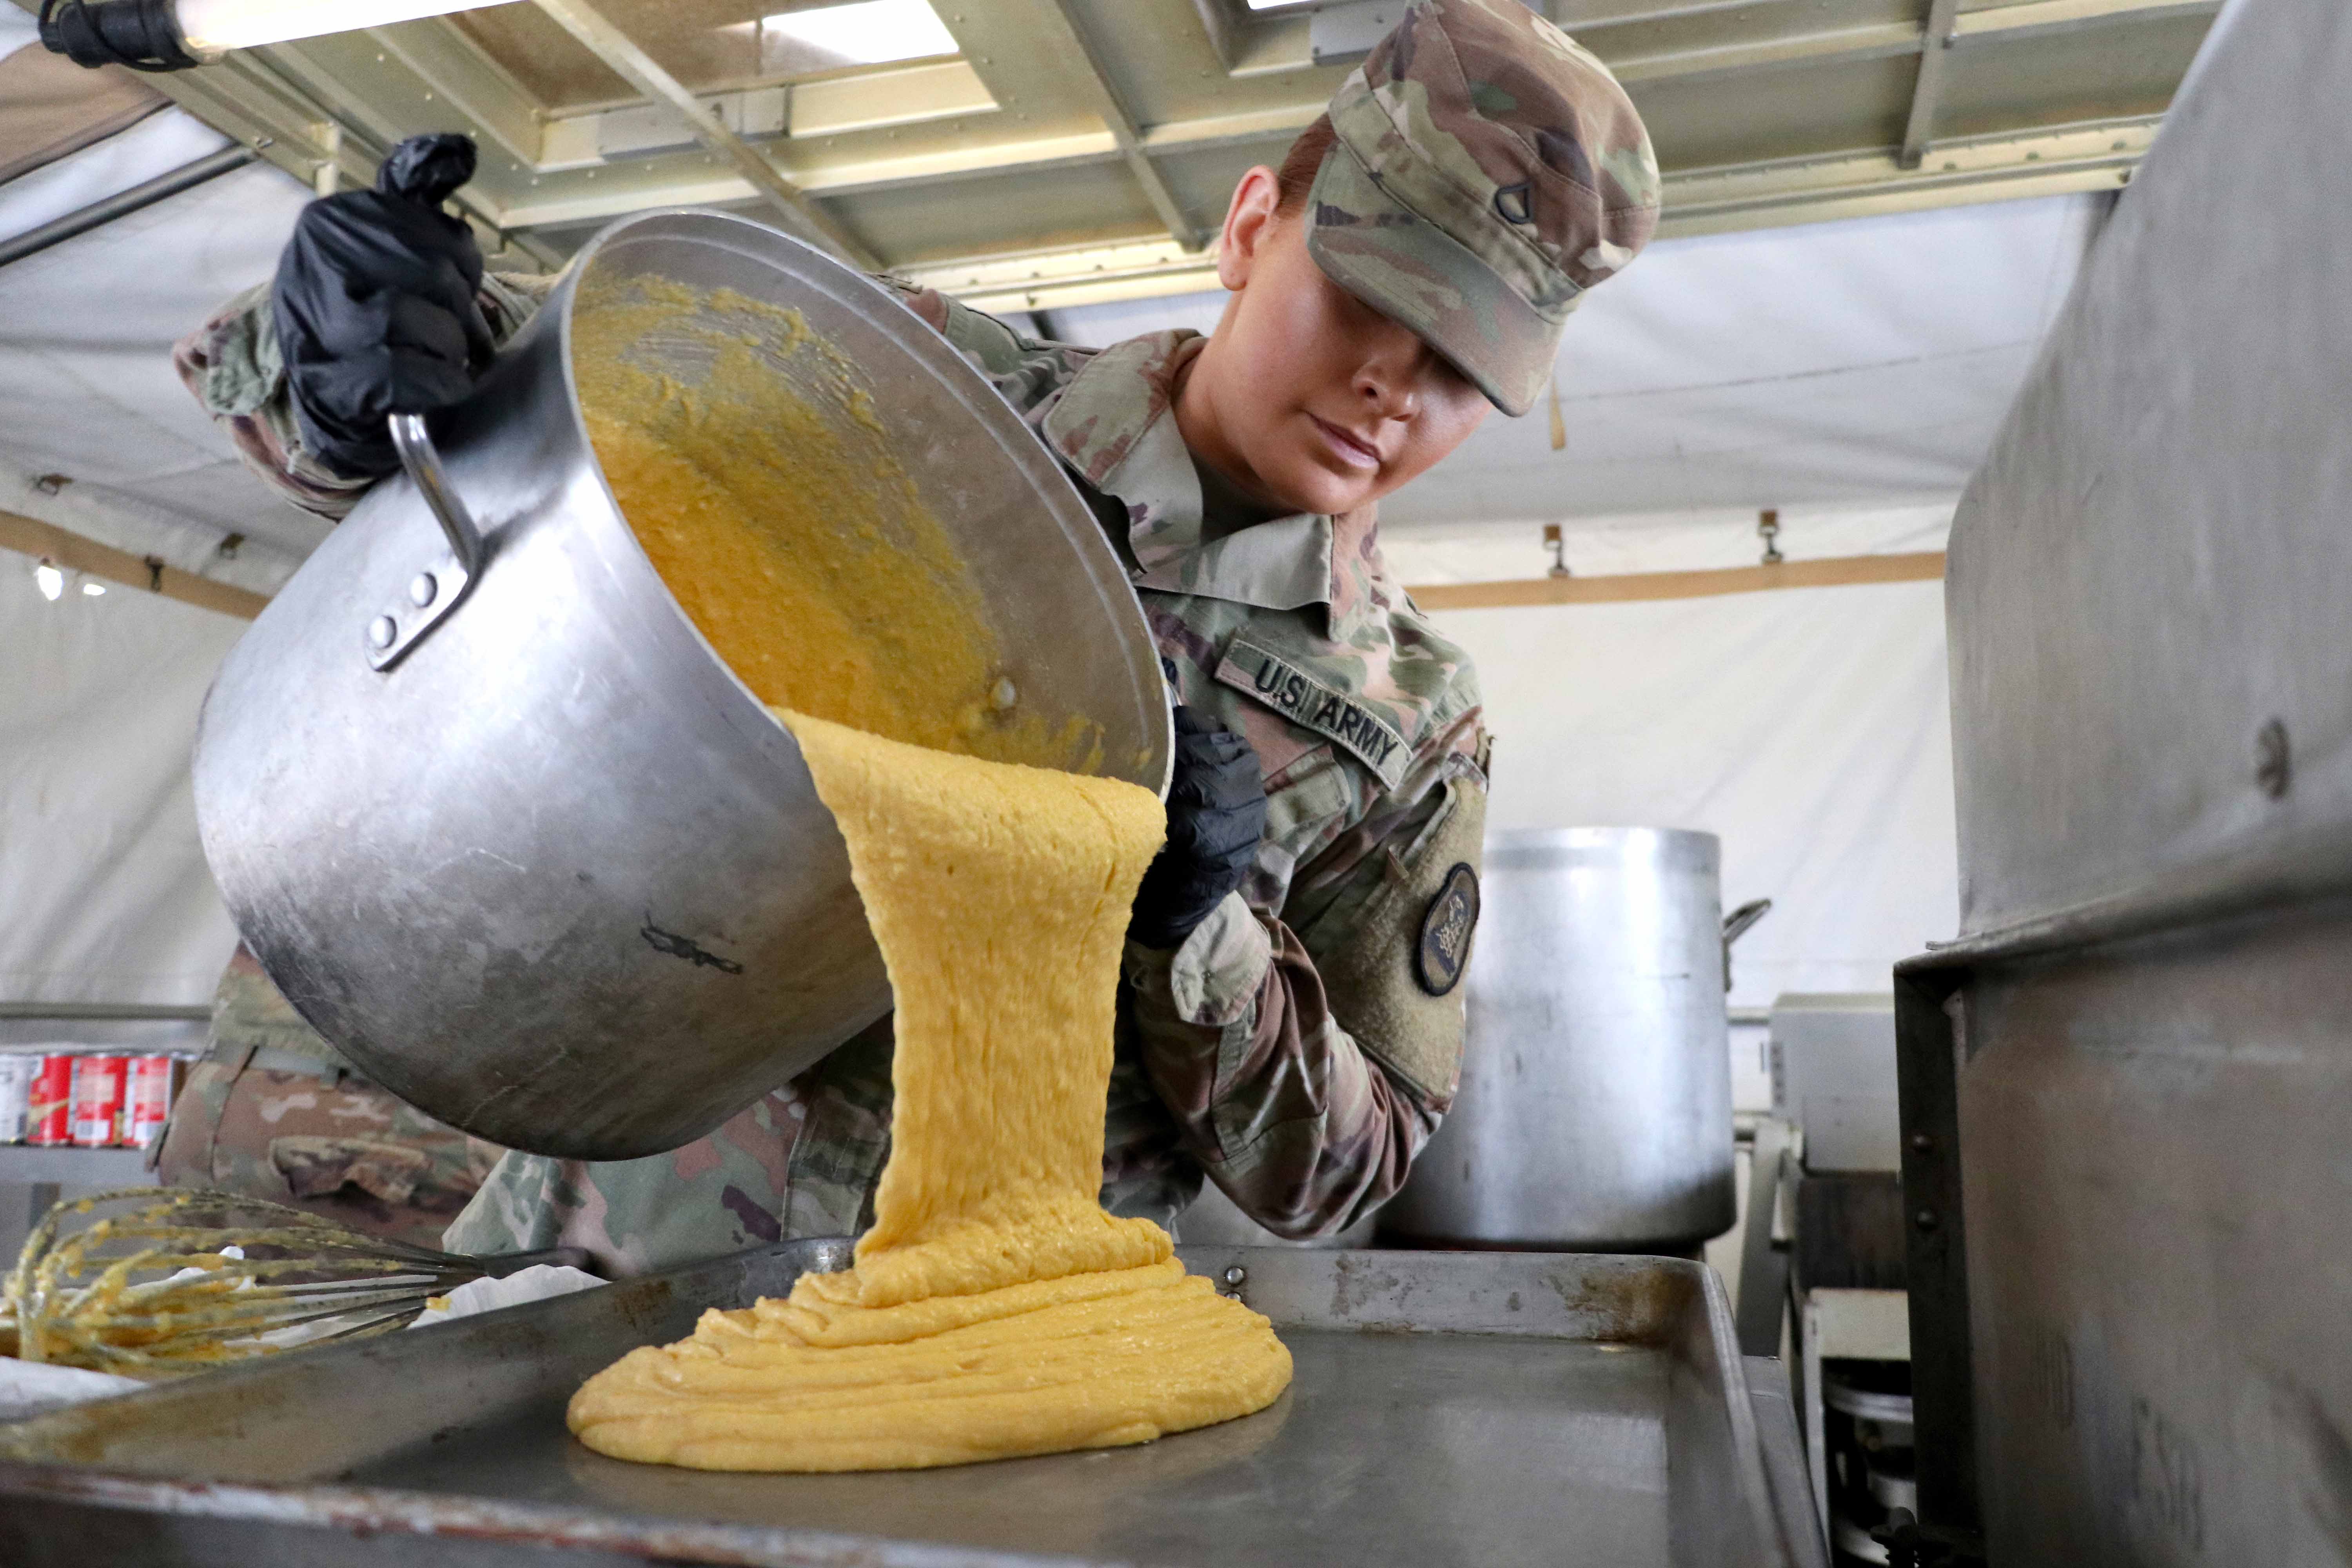 Military chef pouring food from a large vessel